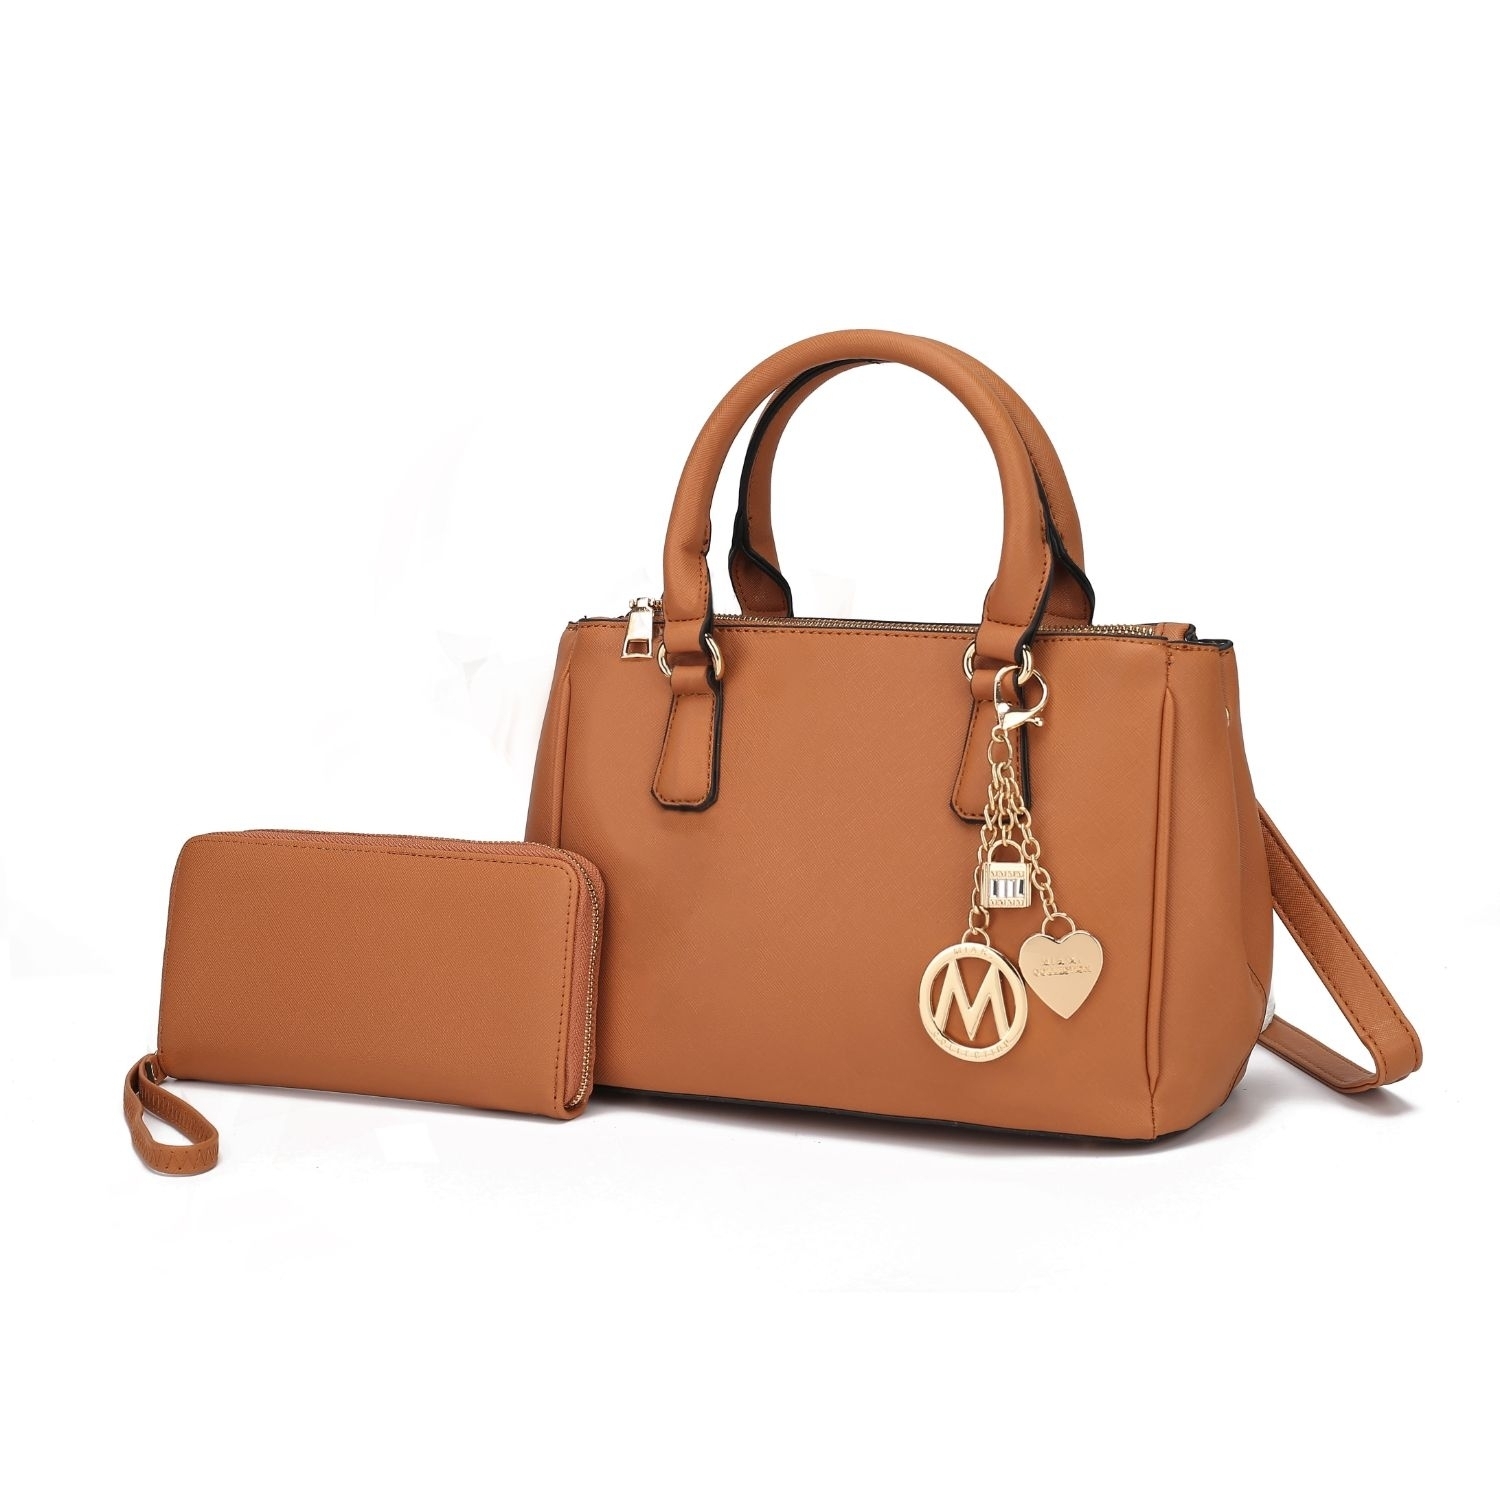 MKF Collection Ruth Vegan Leather Women's Satchel Handbag By Mia K With Wallet - 2 Pieces - Camel